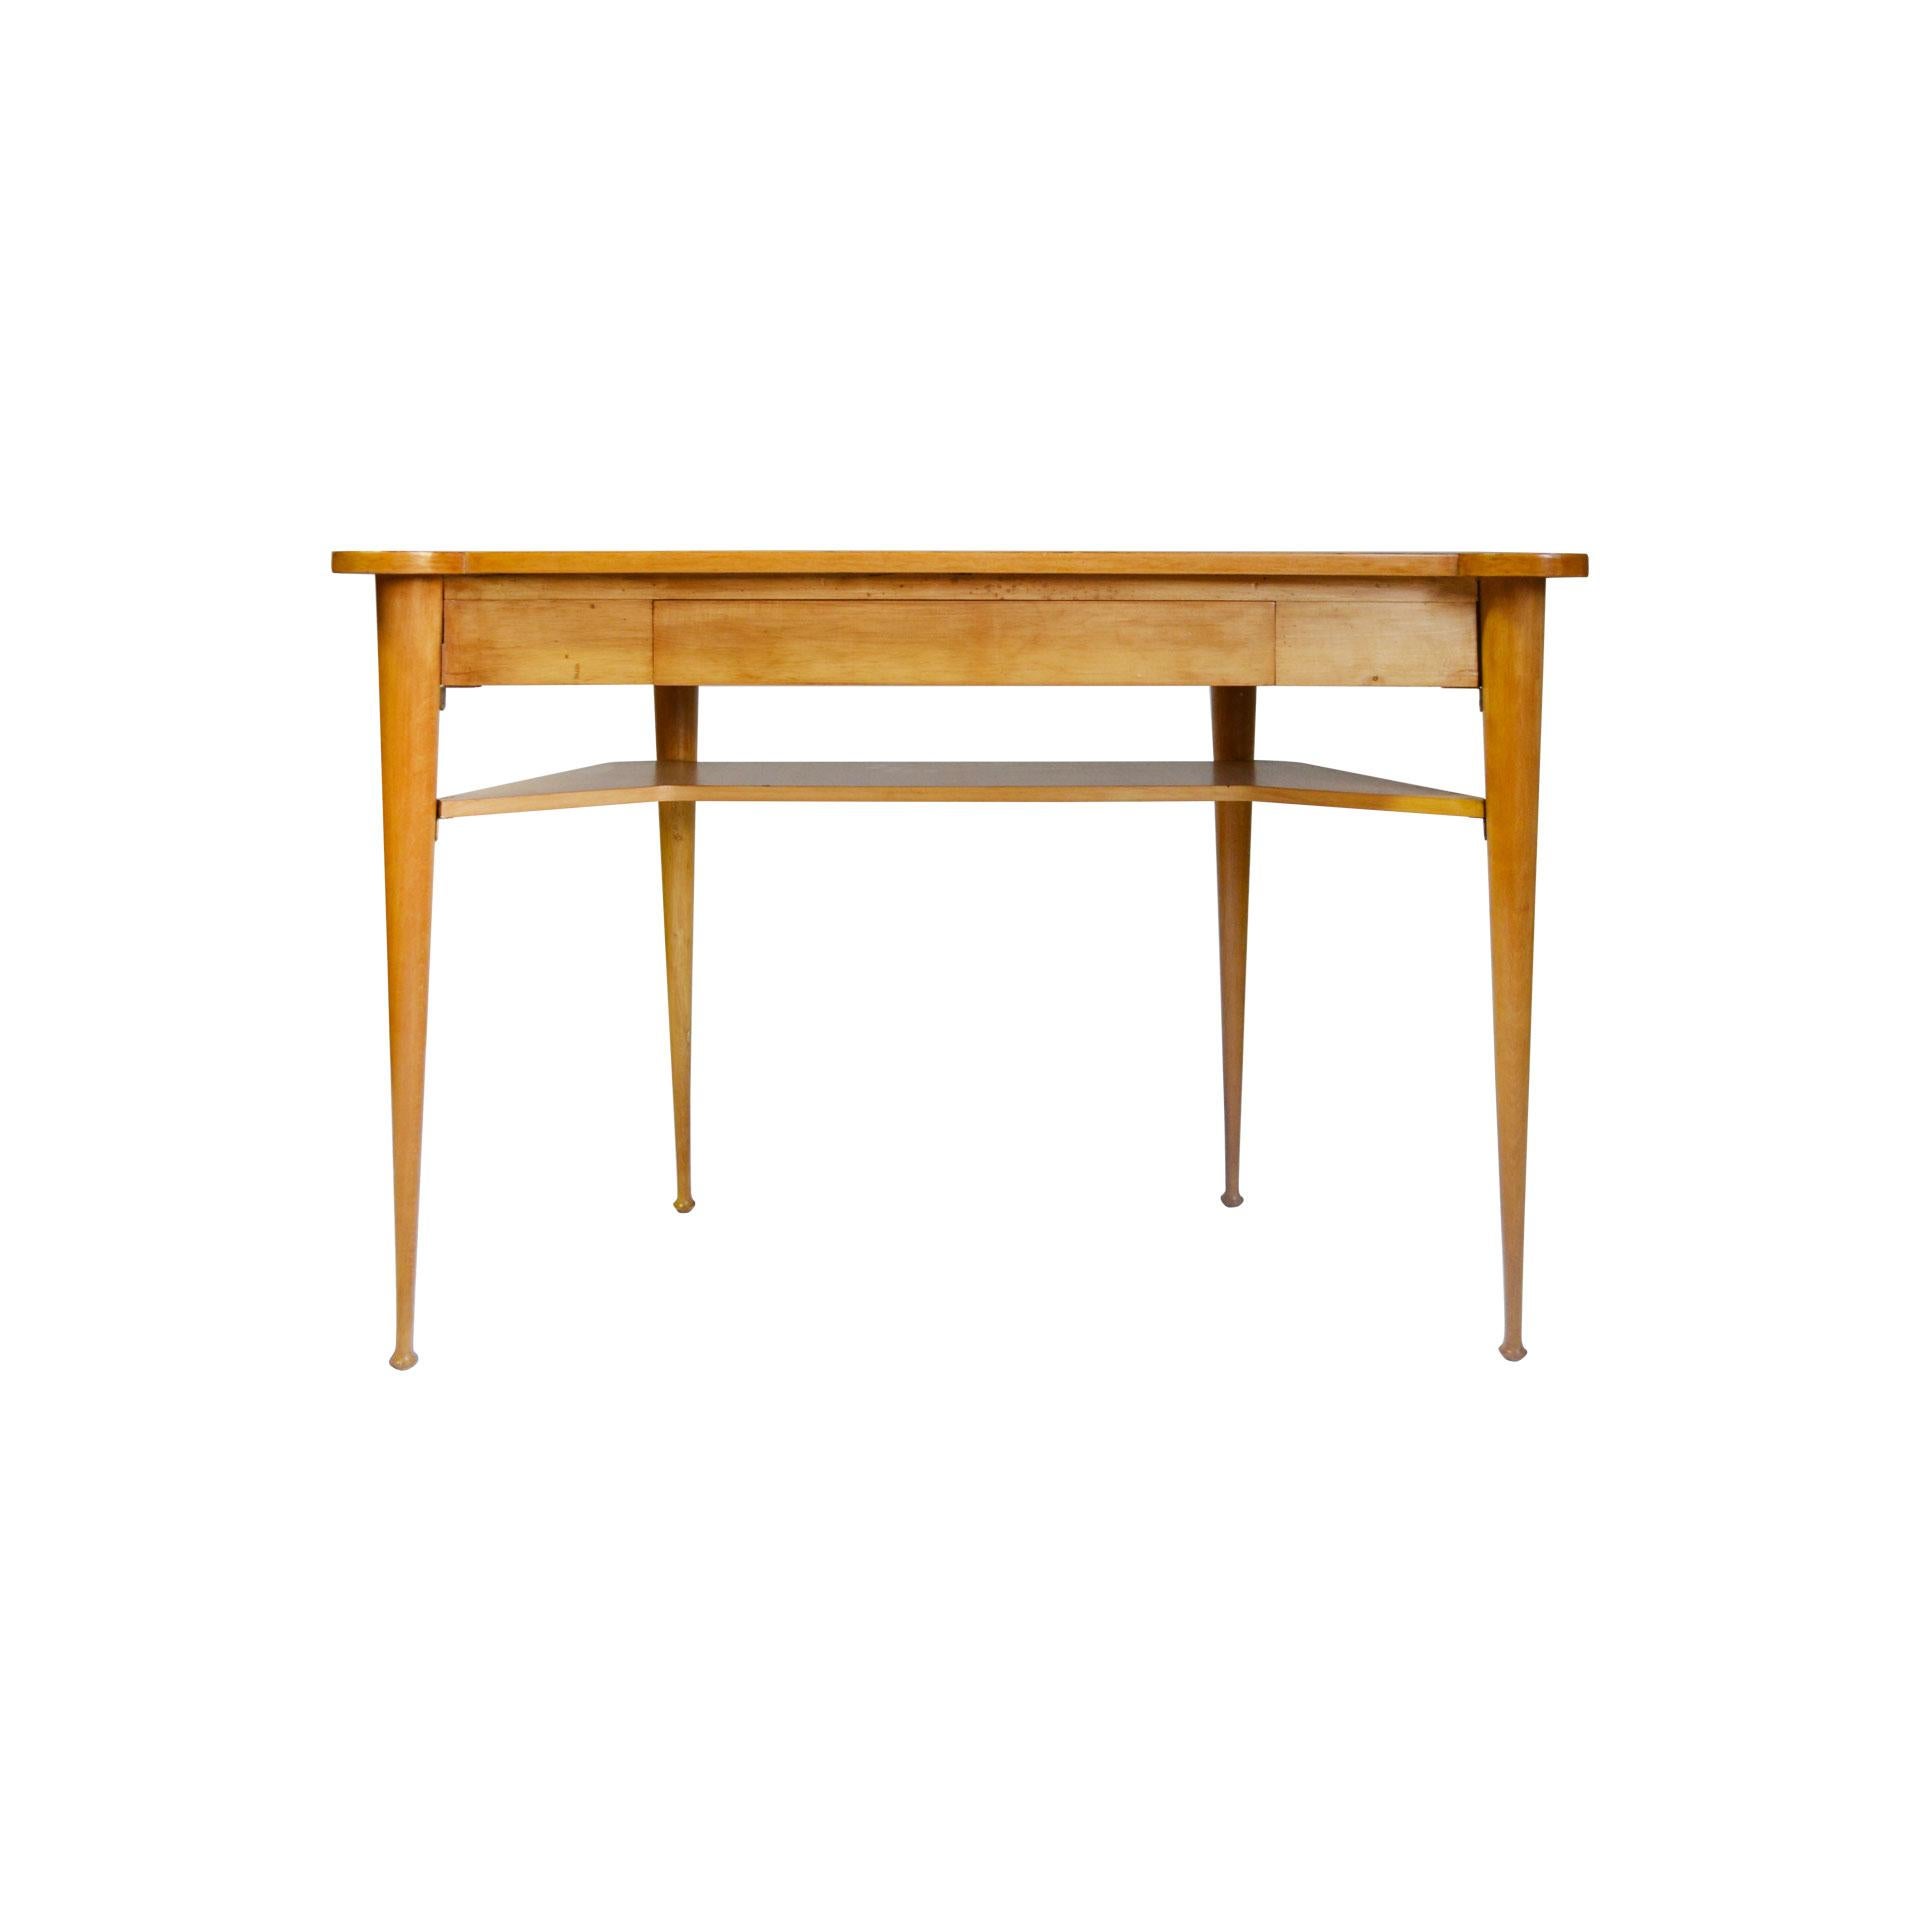 Mid-20th Century 20th Century Italian Production Console Table in Wood with Drawer, 1950s